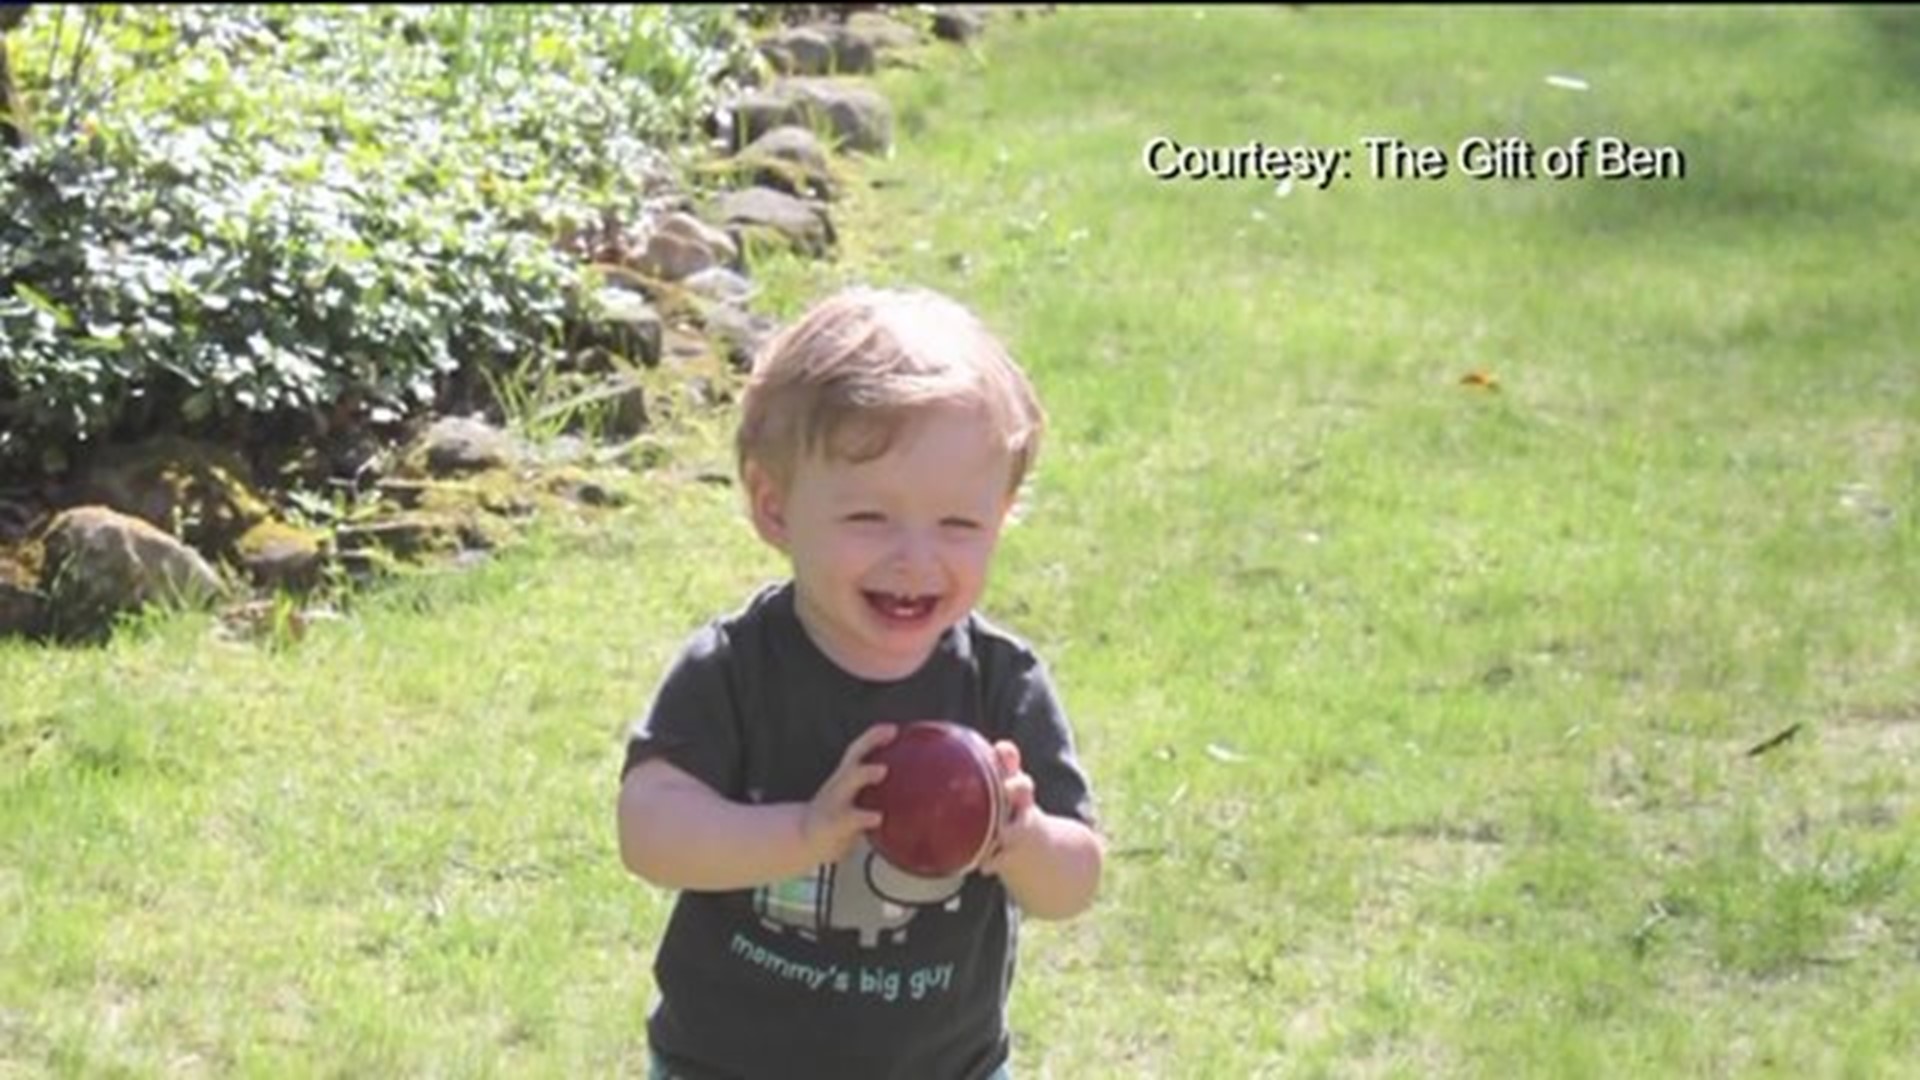 Death Of Ridgefield Baby Ruled A Homicide